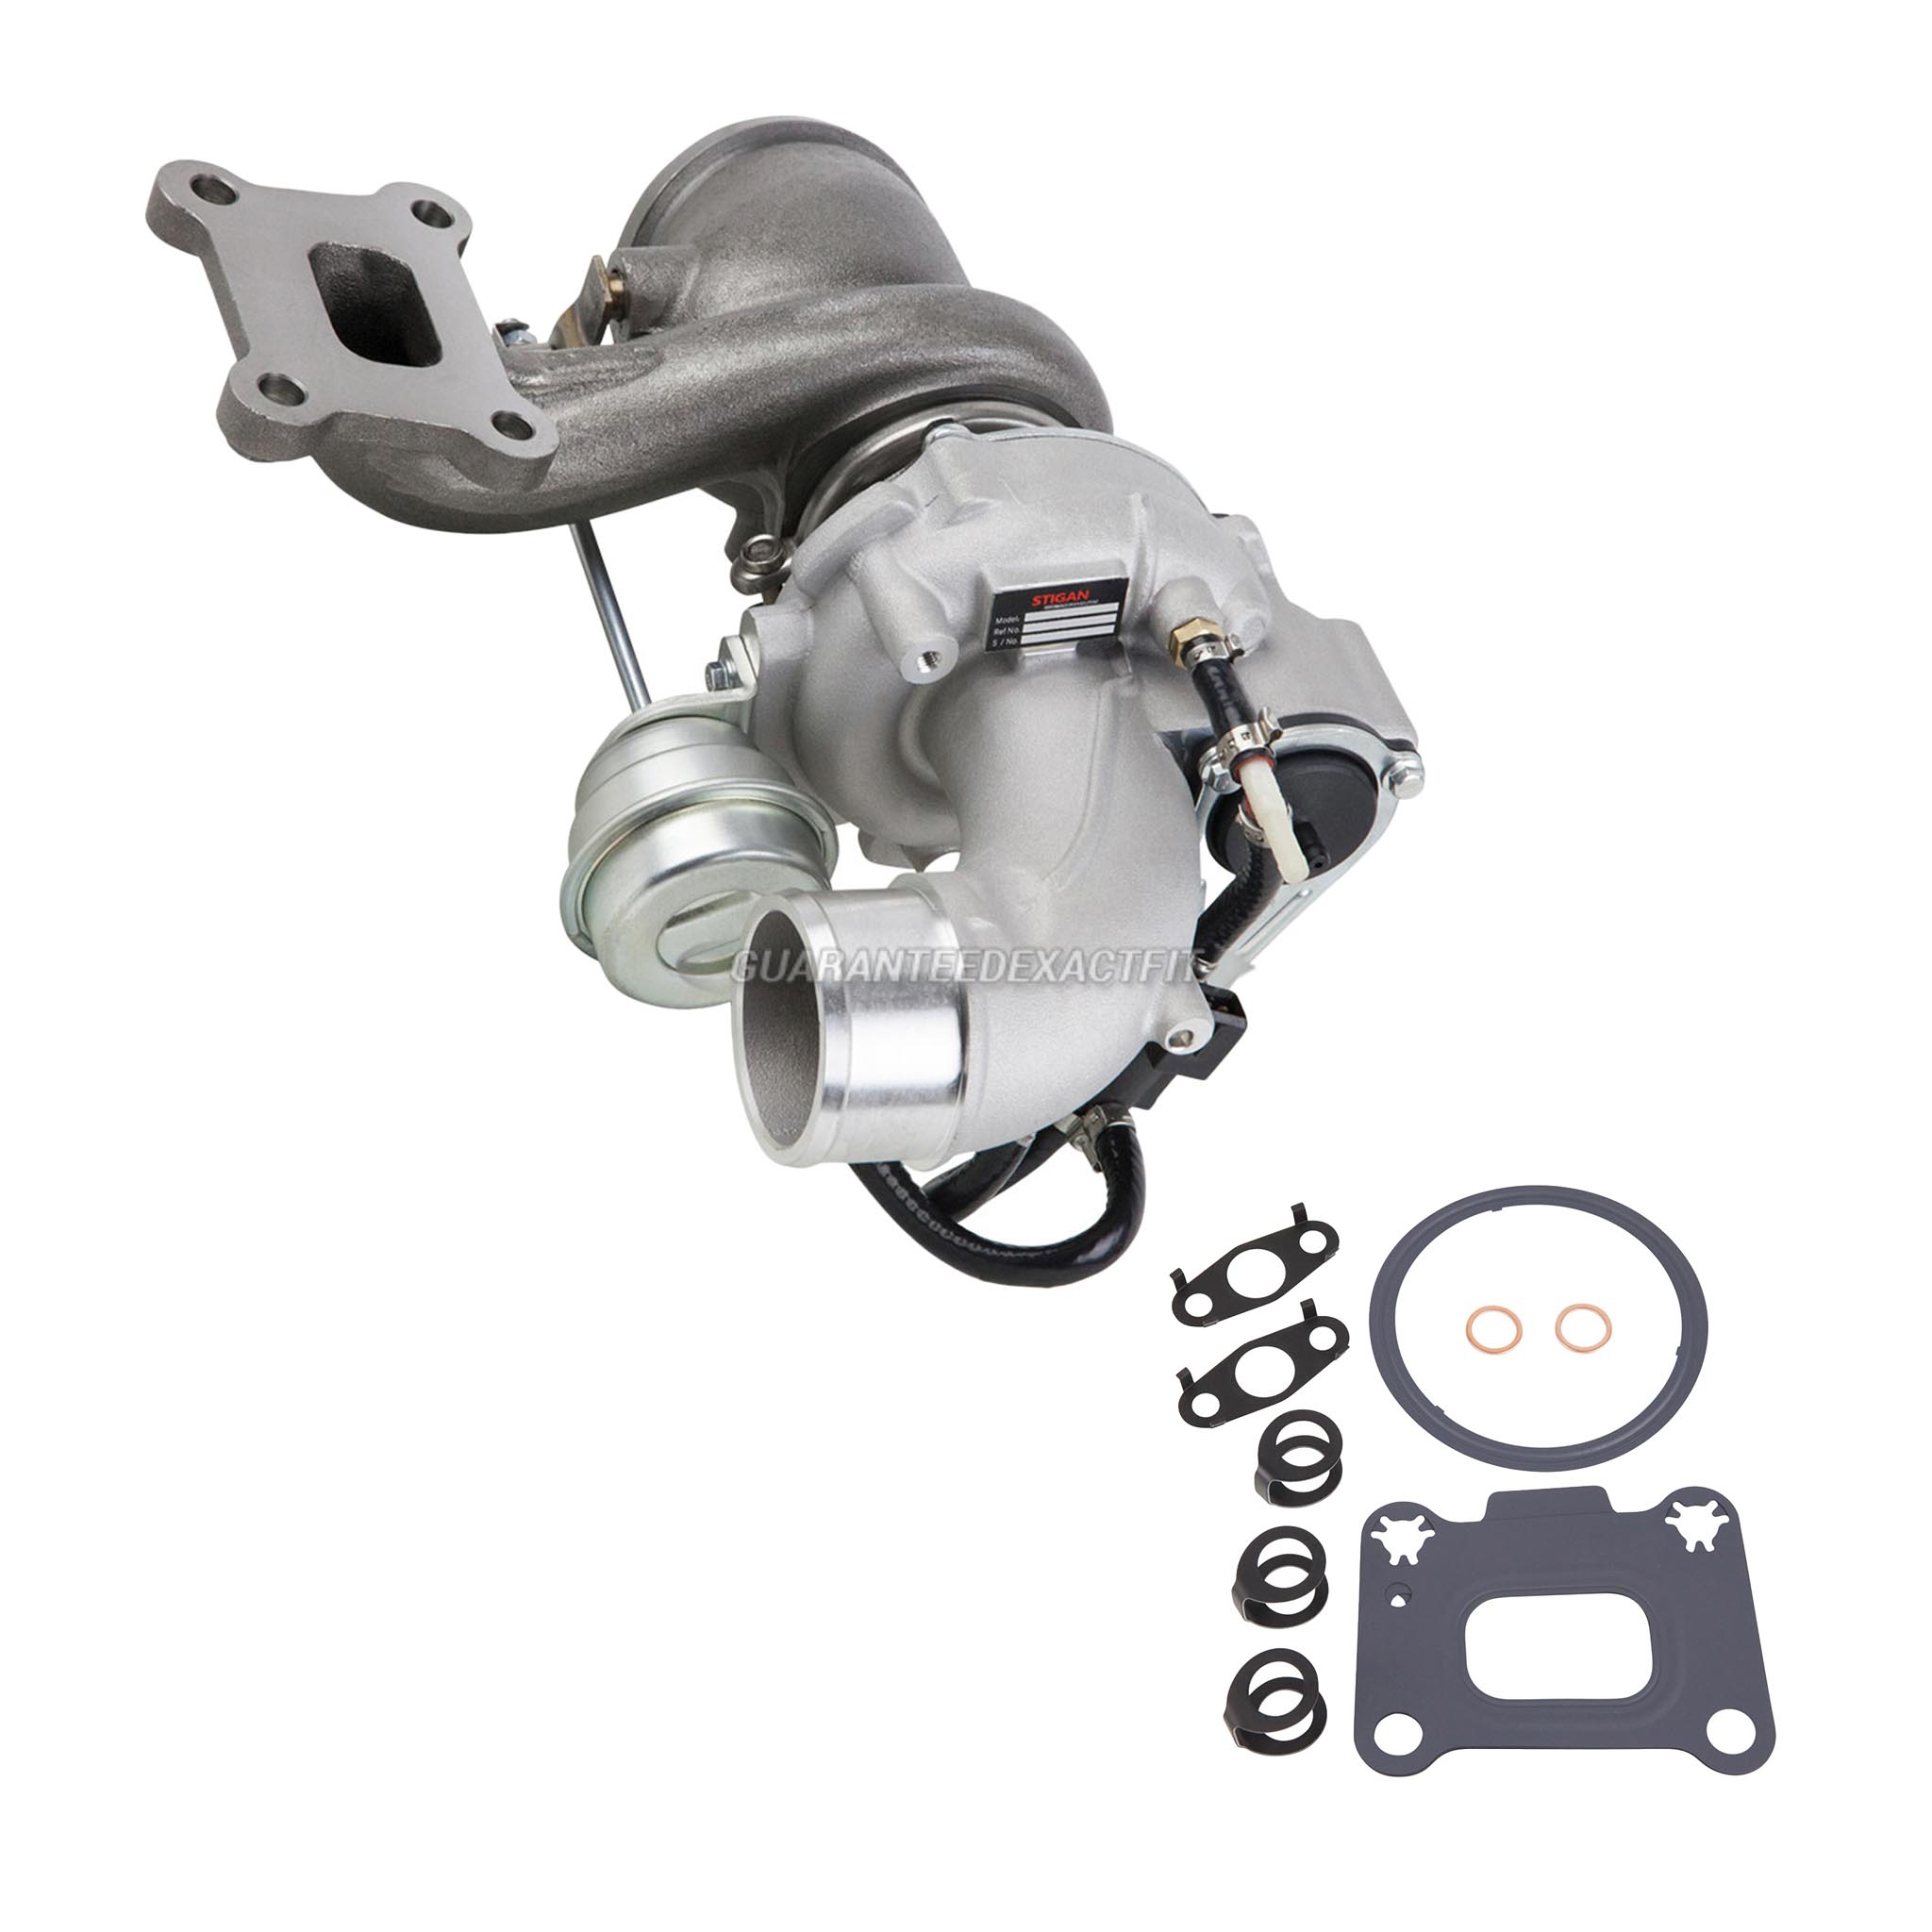  Ford fusion turbocharger and installation accessory kit 